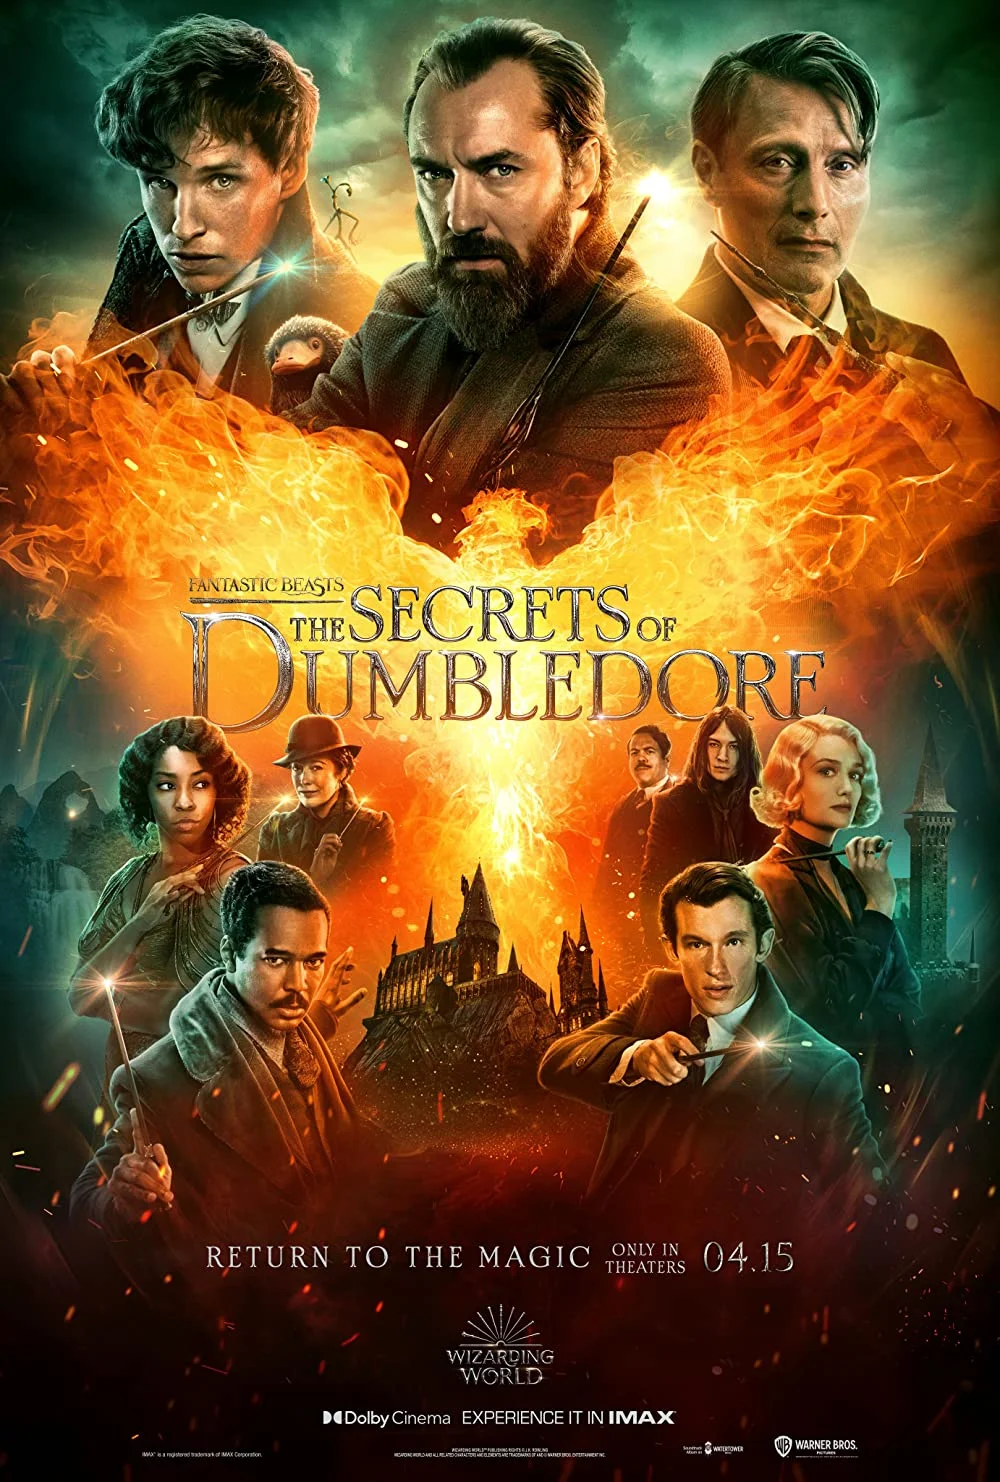 "Fantastic Beasts: The Secrets of Dumbledore" is actually a story about "choice"